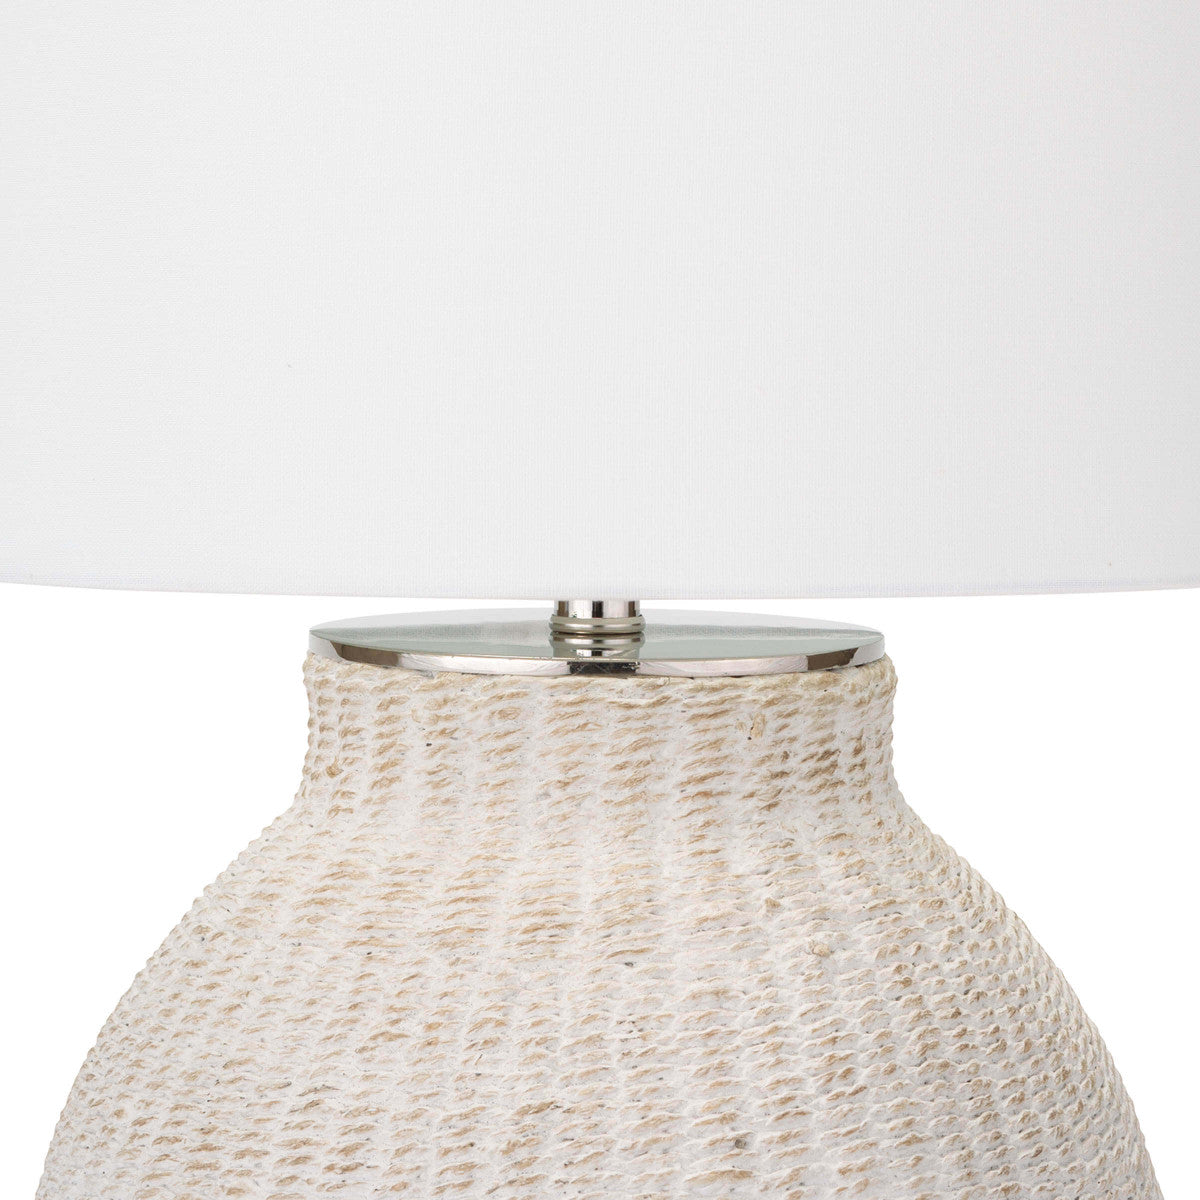 The Hobi Table Lamp has a gorgeous white-washed, natural woven pattern that catches our eye. The casual elegance in this lamp completes the look for any living room or bedroom.   Size: 18"w x 18"d x 26.5"h Material: Natural Material